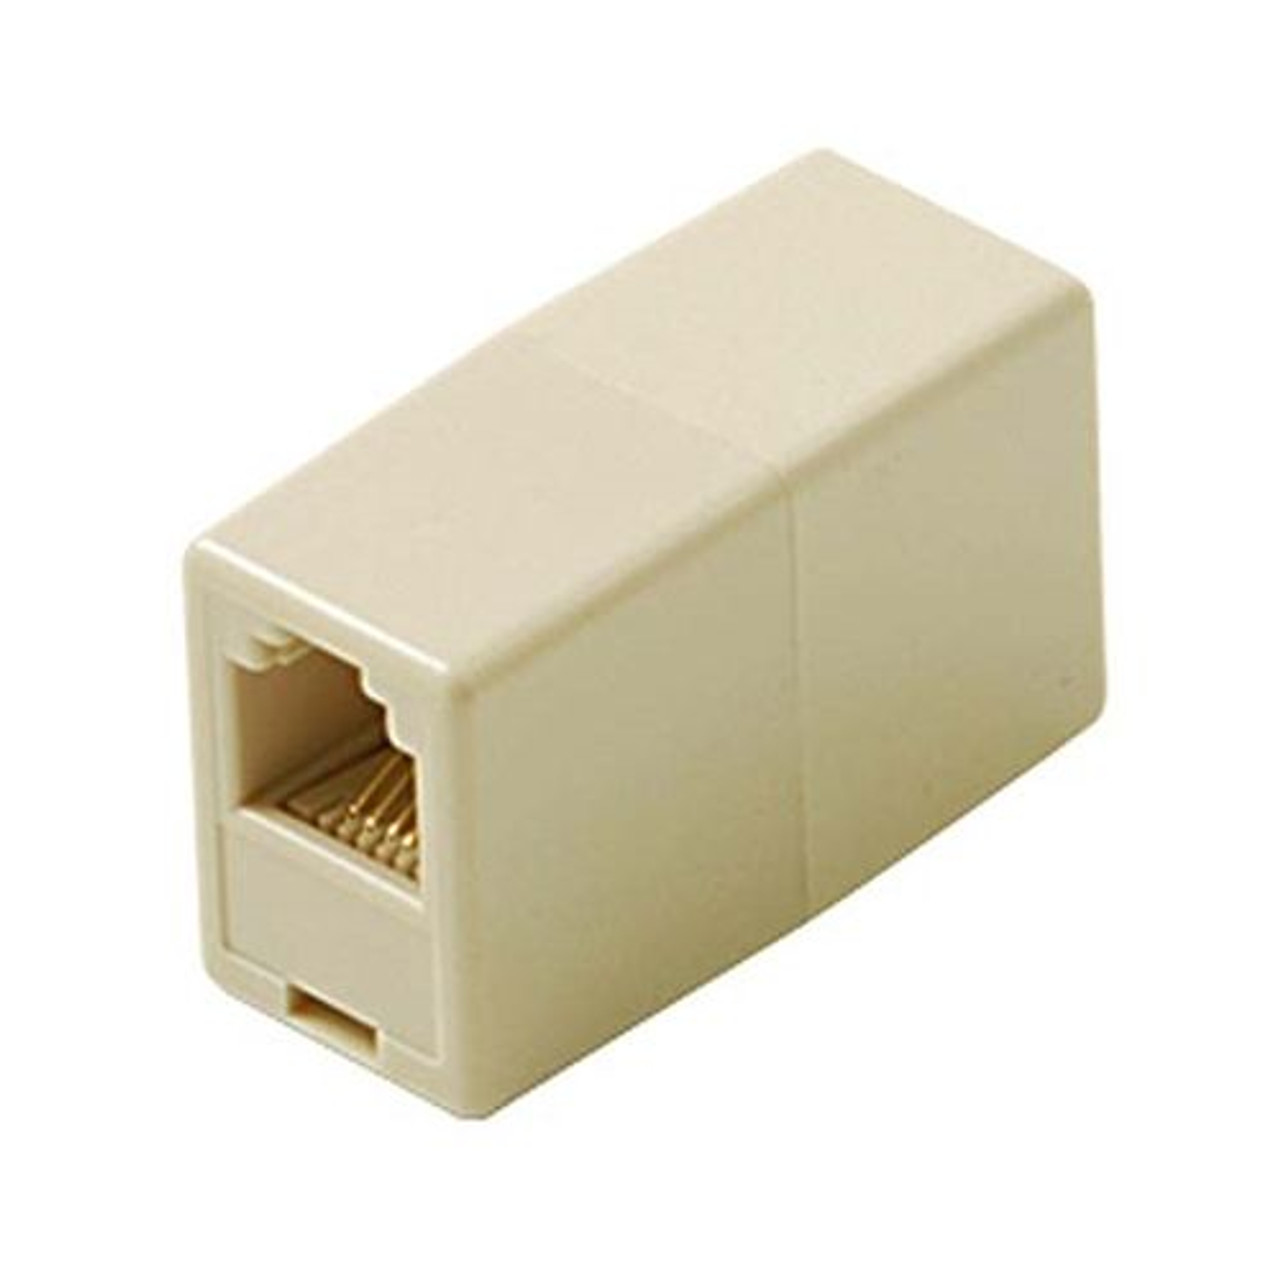 Eagle Modular Phone In-Line Coupler Ivory 10 Pack 4-Conductor RJ11 Phone Telephone Phone Inline Adaptor Cord Jack Plug Extension Add-On Cable Splice Connection